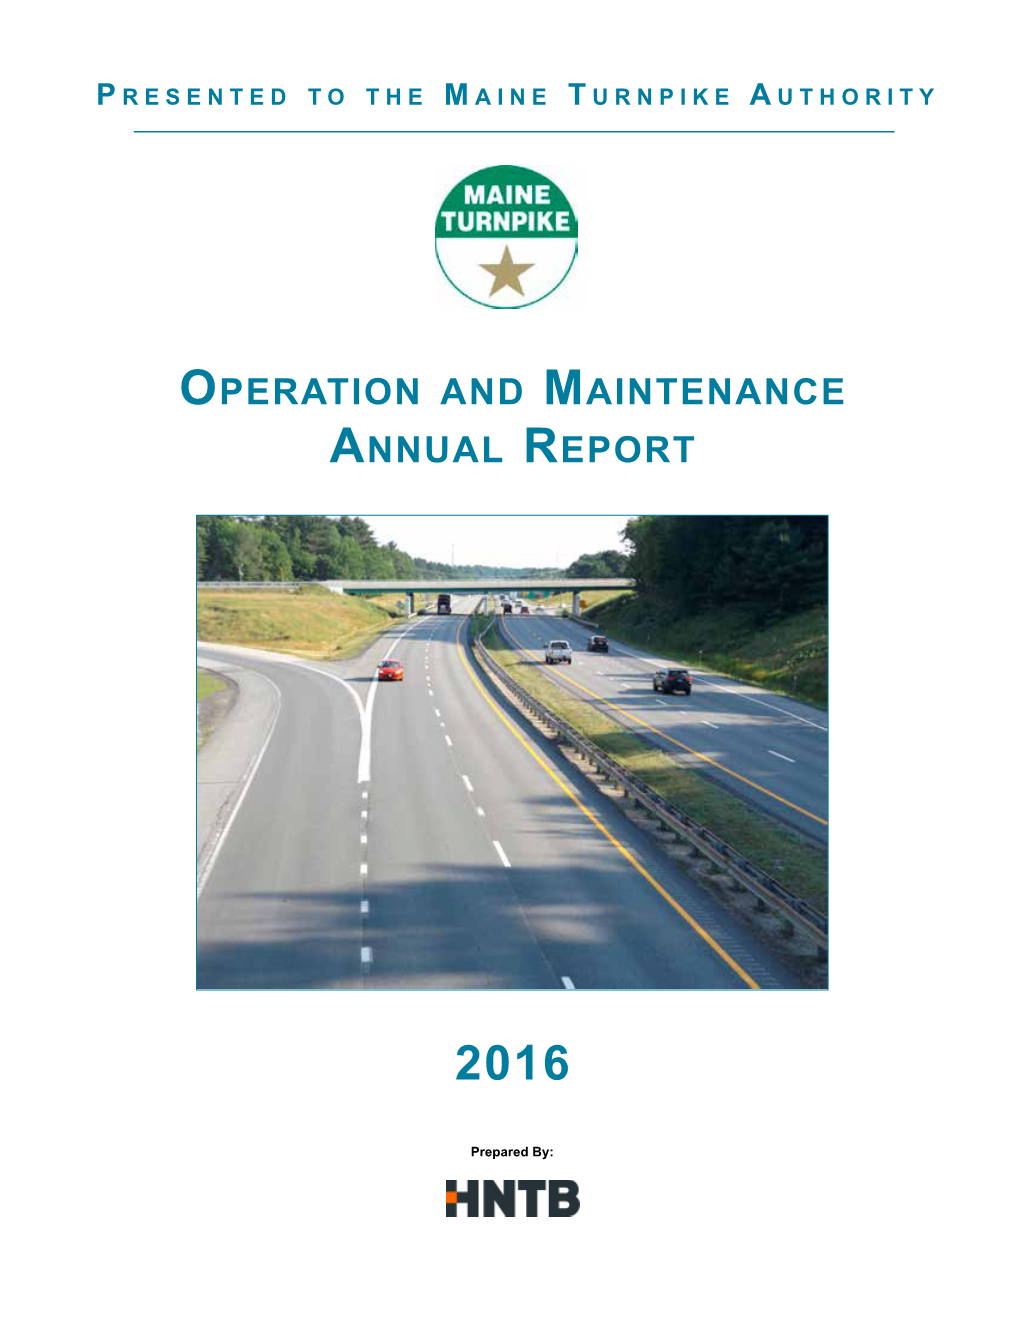 2016 Operation and Maintenance Annual Report for the Maine Turnpike